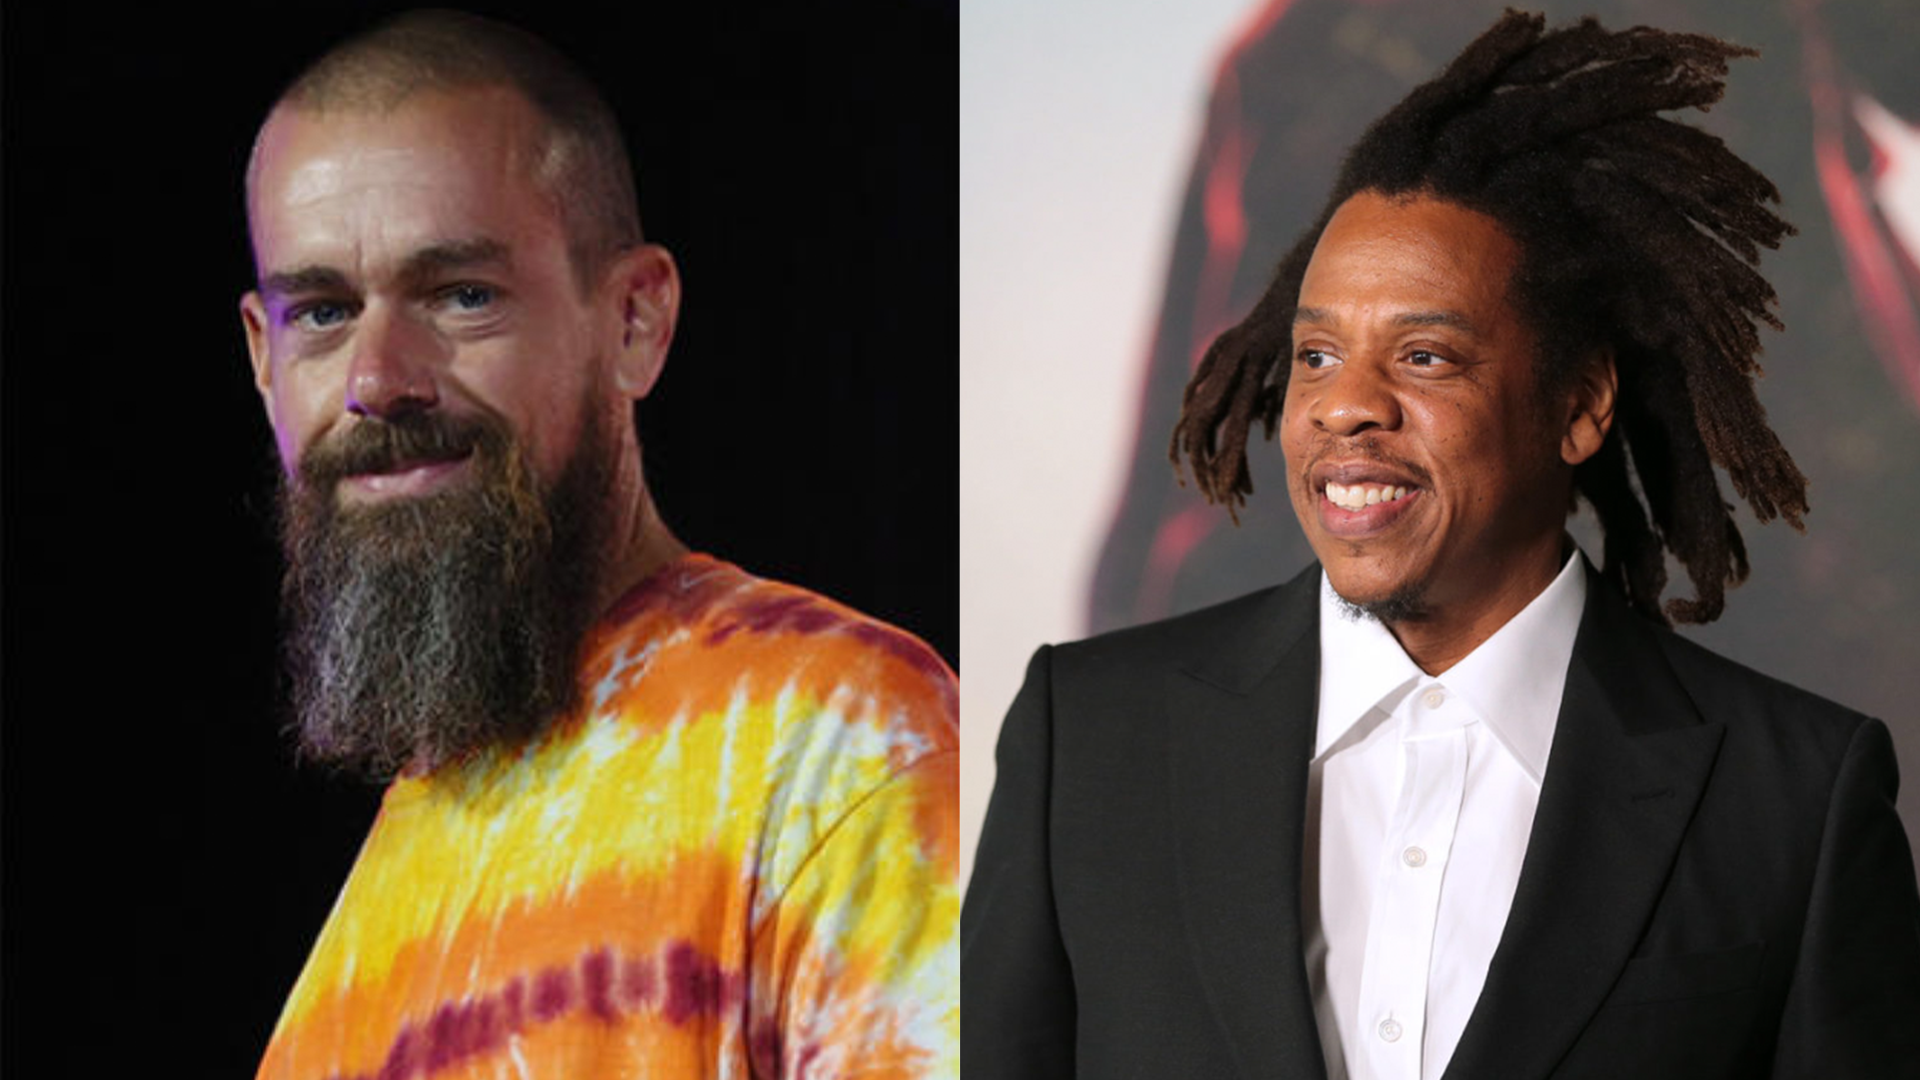 Billionaires Jay-Z, Jack Dorsey Airdrop Around $1K Each In Bitcoin To Residents Of Marcy Houses